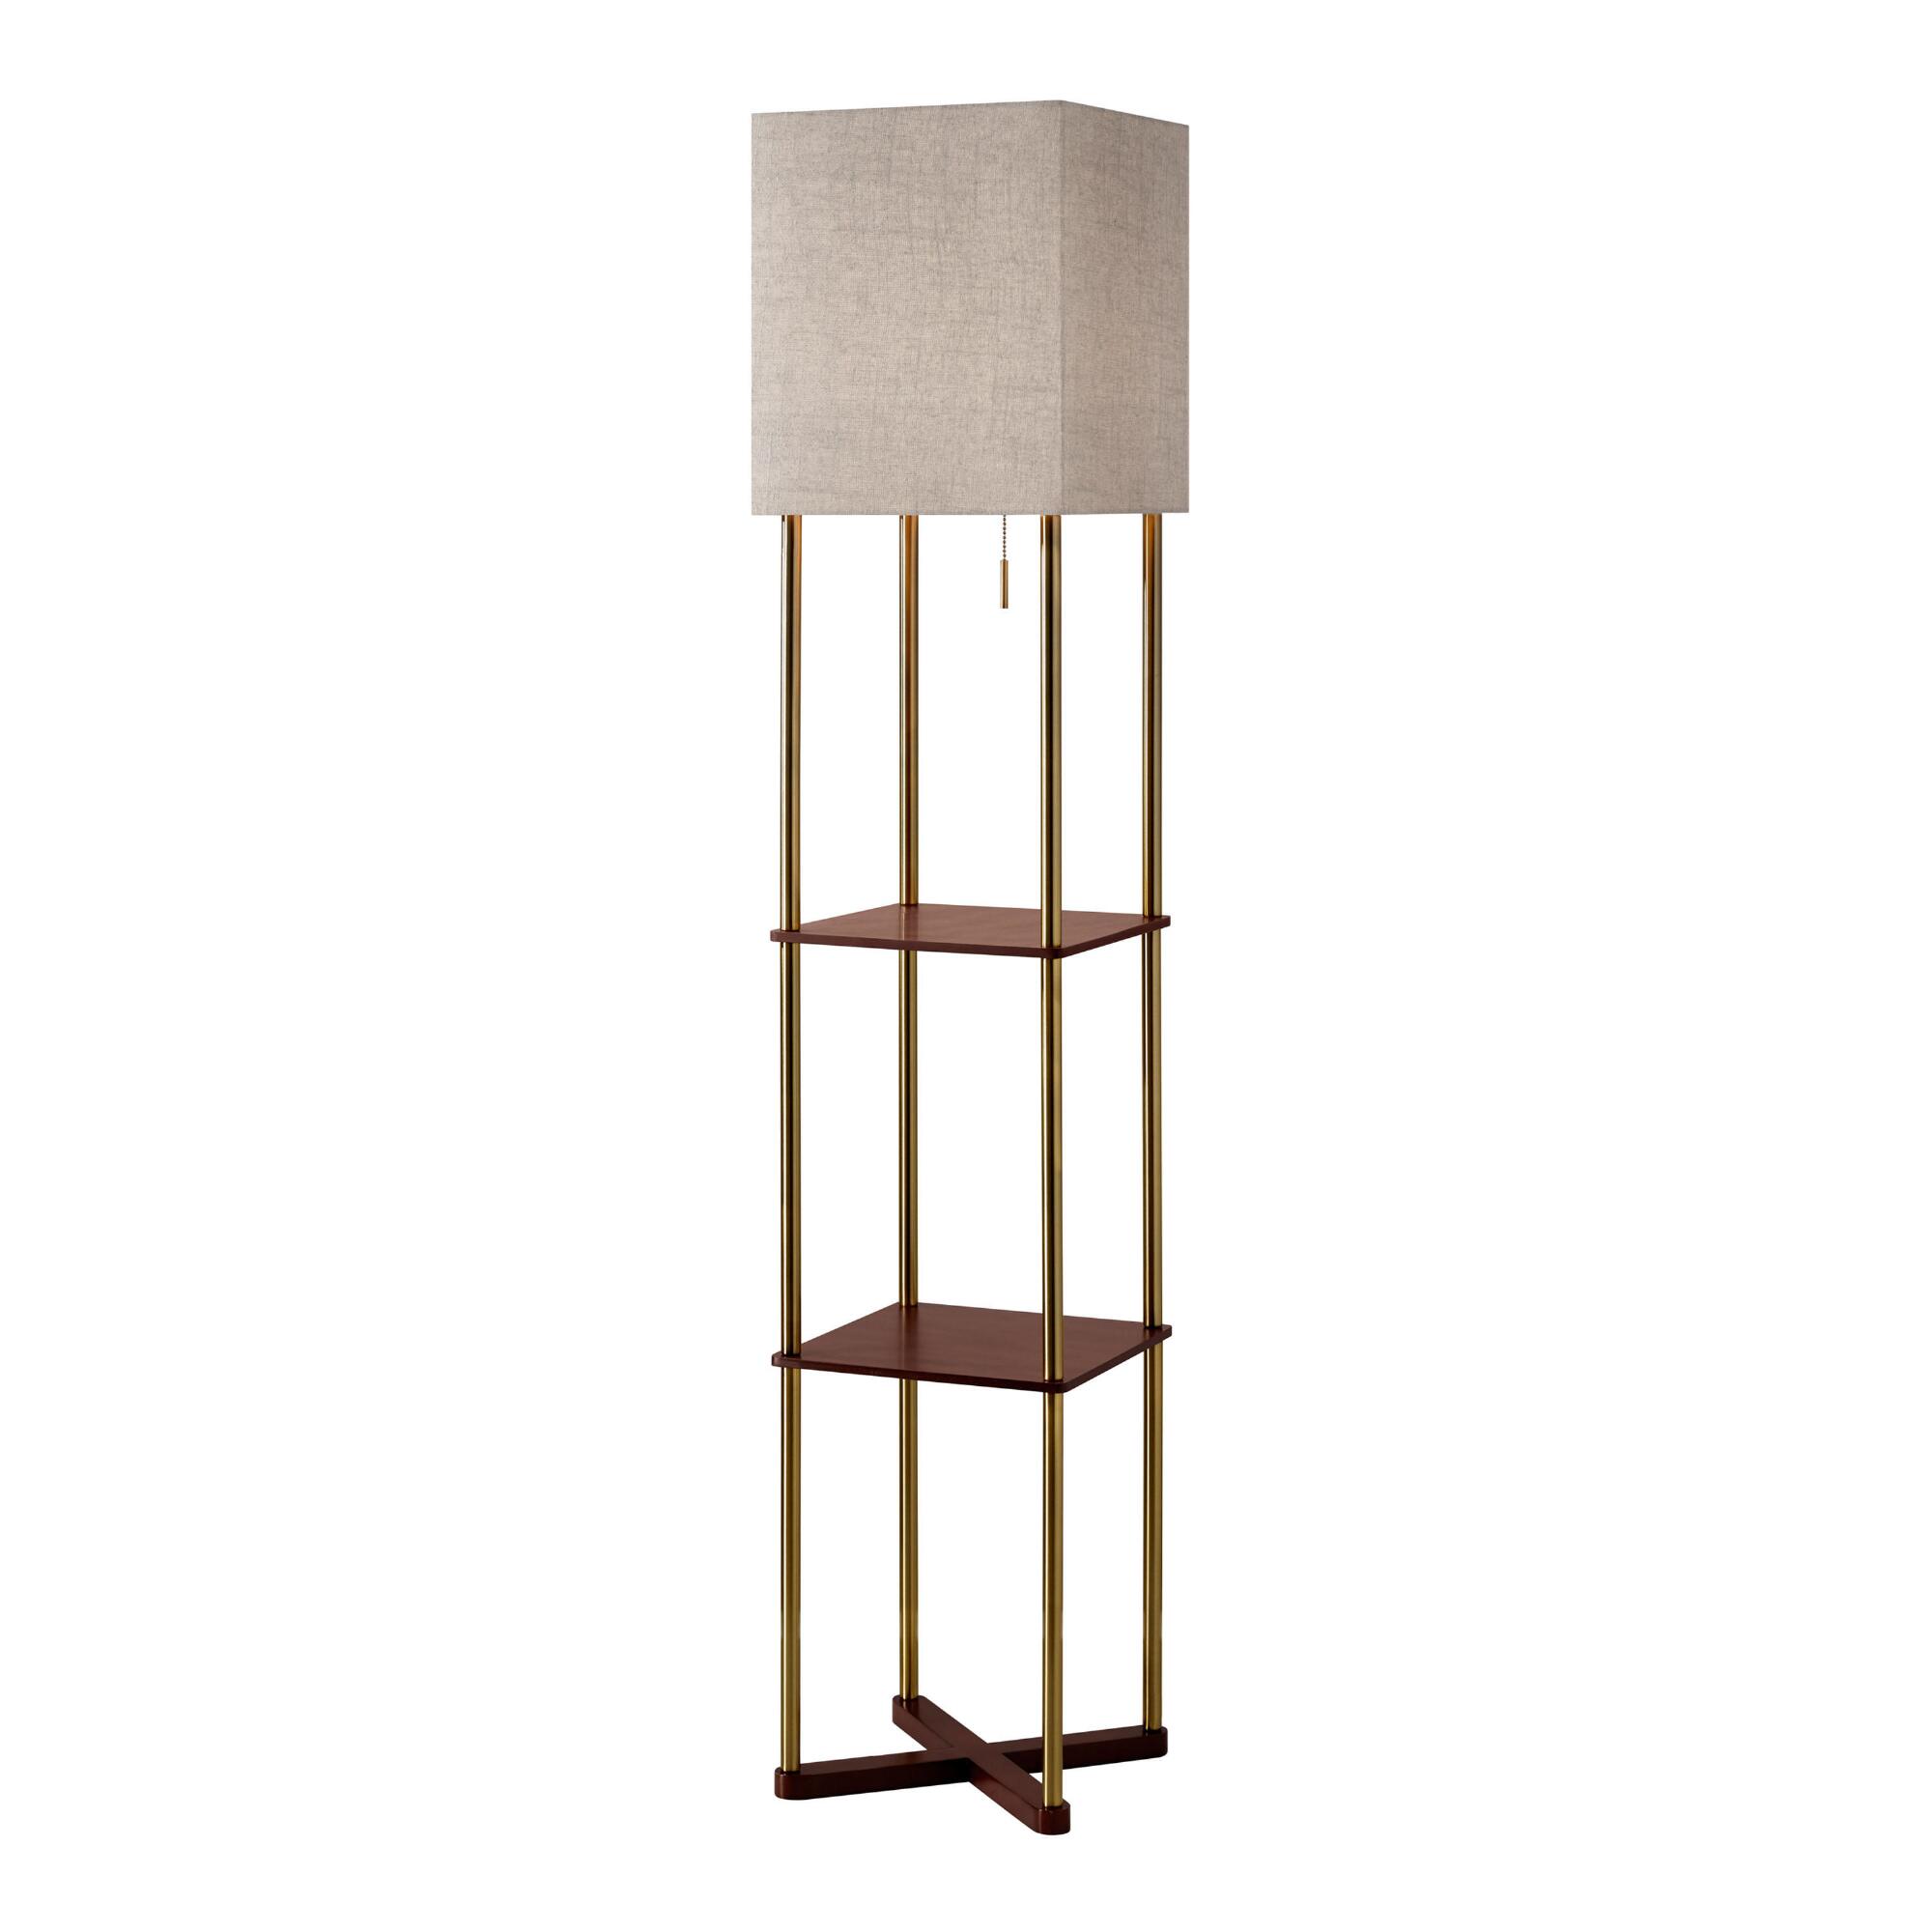 Antique Brass Homer Floor Lamp with USB and Shelves: Metallic by World Market